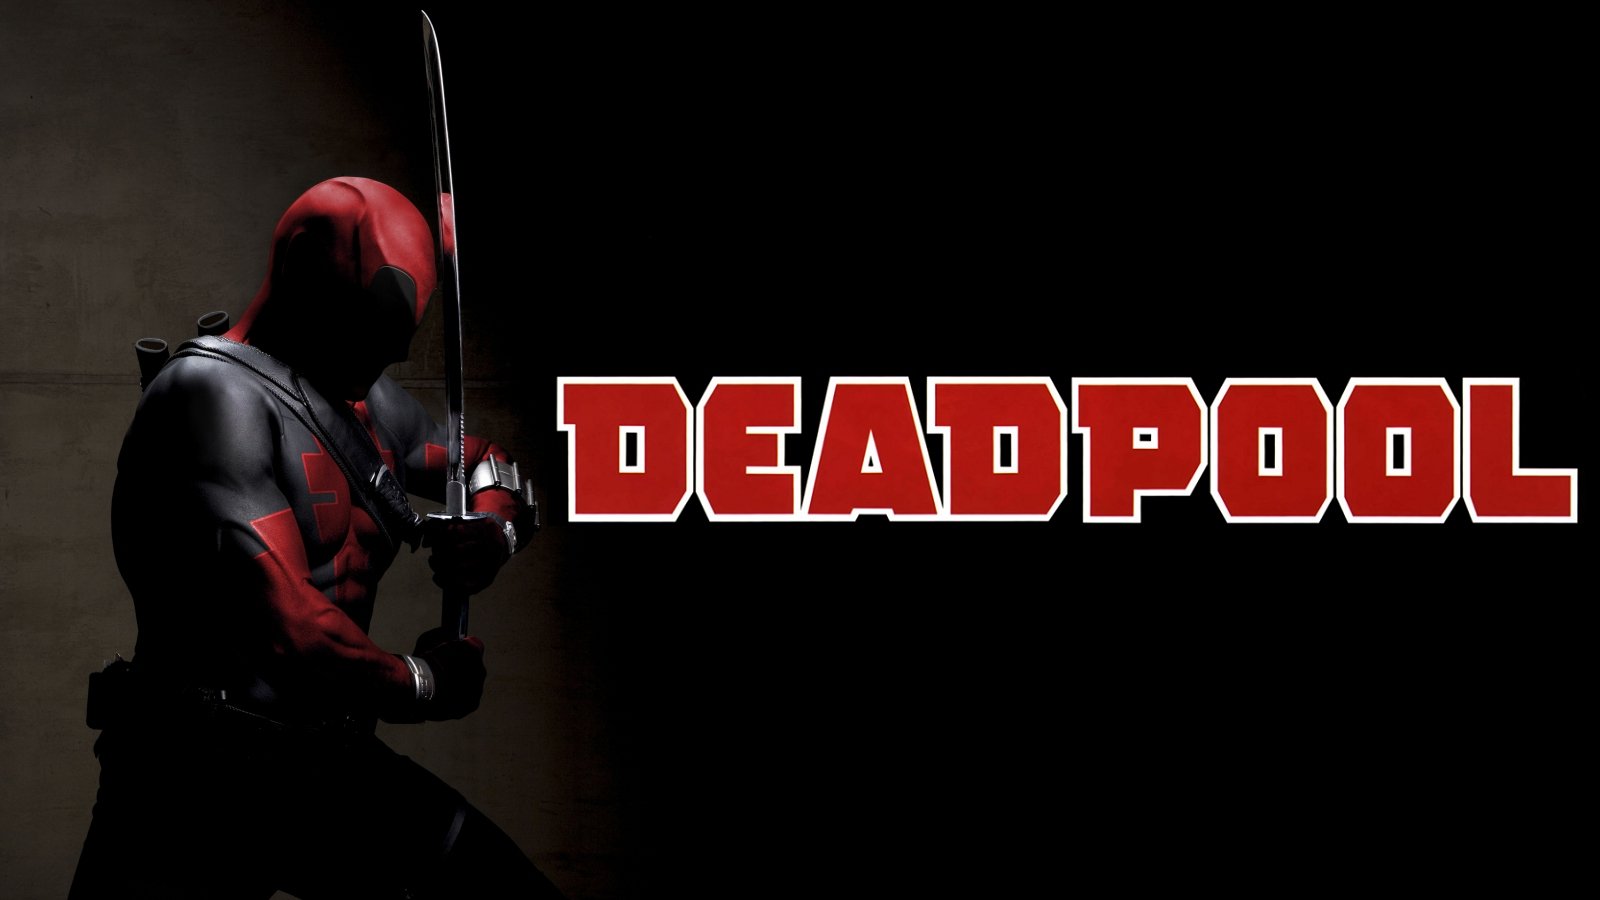  November 9 2015 By Stephen Comments Off on Deadpool Movie Wallpaper 1600x900